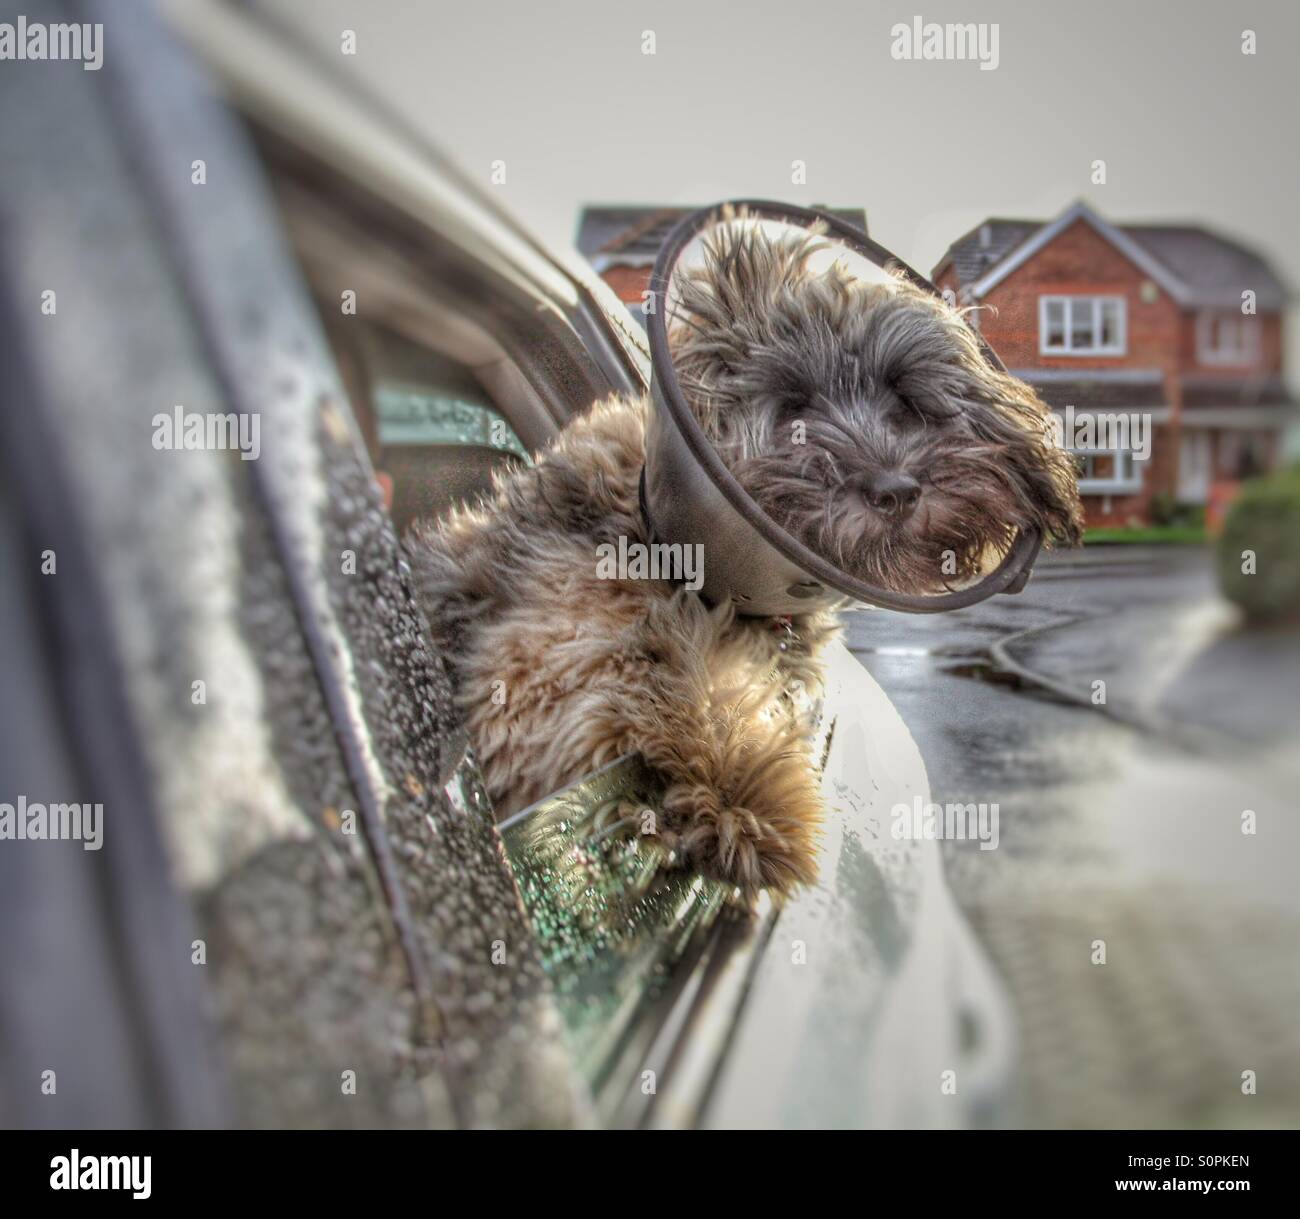 A poorly dog with a protective collar on getting some fresh air from the side window of a moving car. Stock Photo